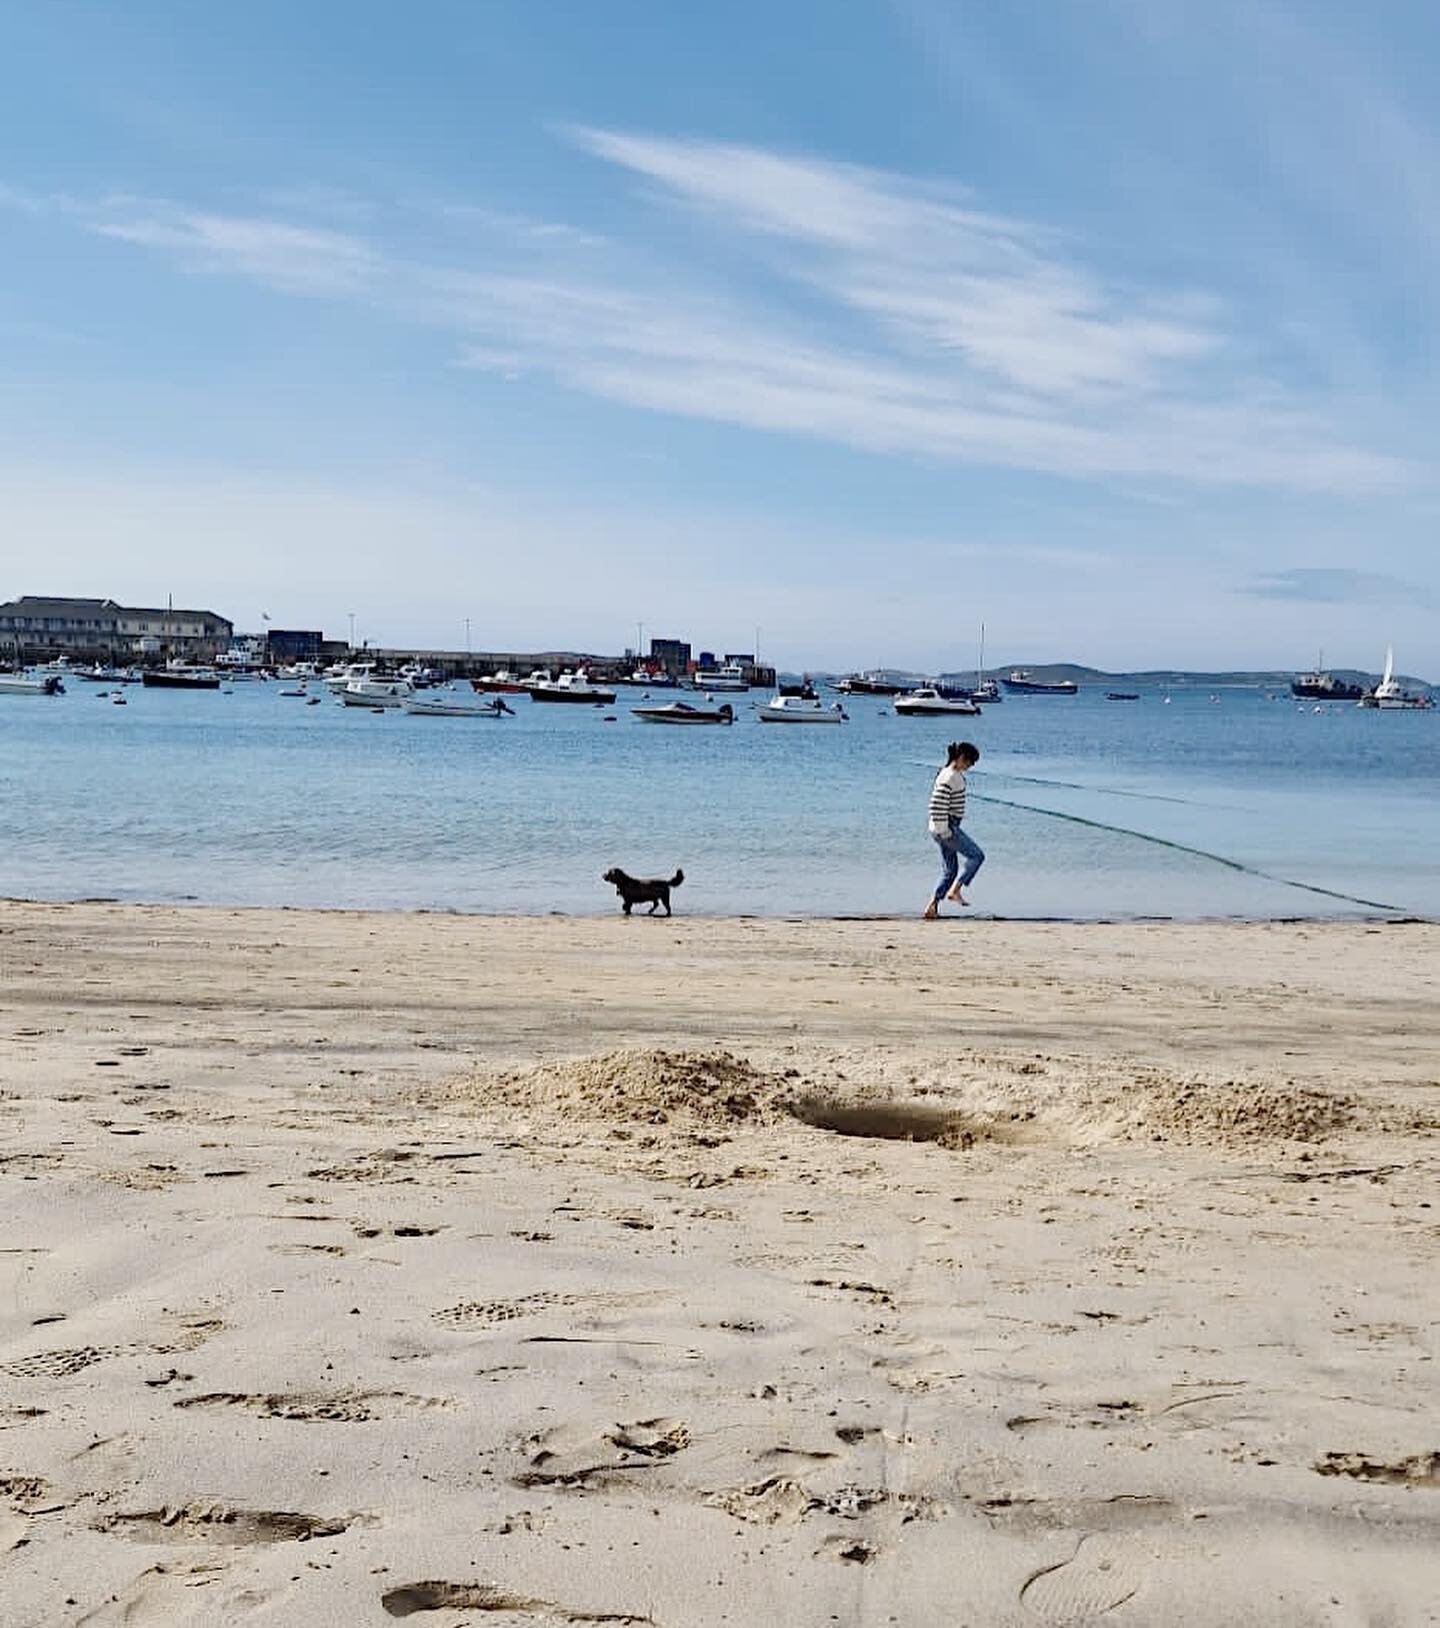 HAPPY place 🌊🌴

Captured here, enjoying the most glorious beach day on St Mary&rsquo;s, Isles of Scilly 🏝️🌞

________

#happyplace #islandlife #islandescape #islesofscilly #scillyisles #stmarys #islandviews #sunandsea #alltheblues #bythesea #beac